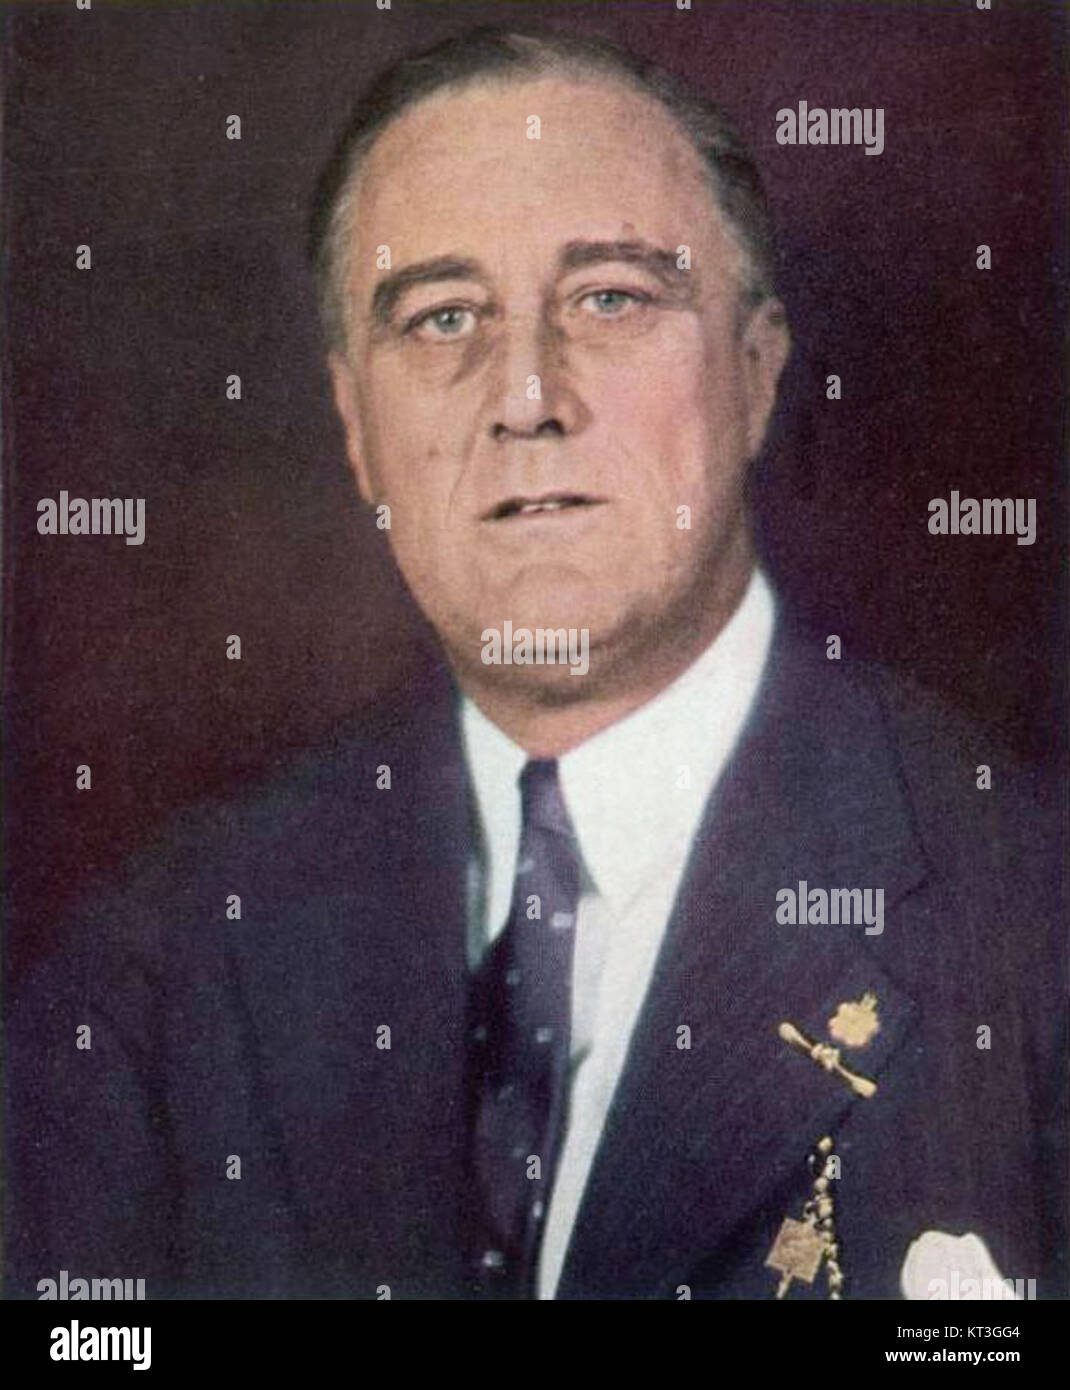 Franklin D. Roosevelt TIME Man of the Year 1933 color photo Stock Photo